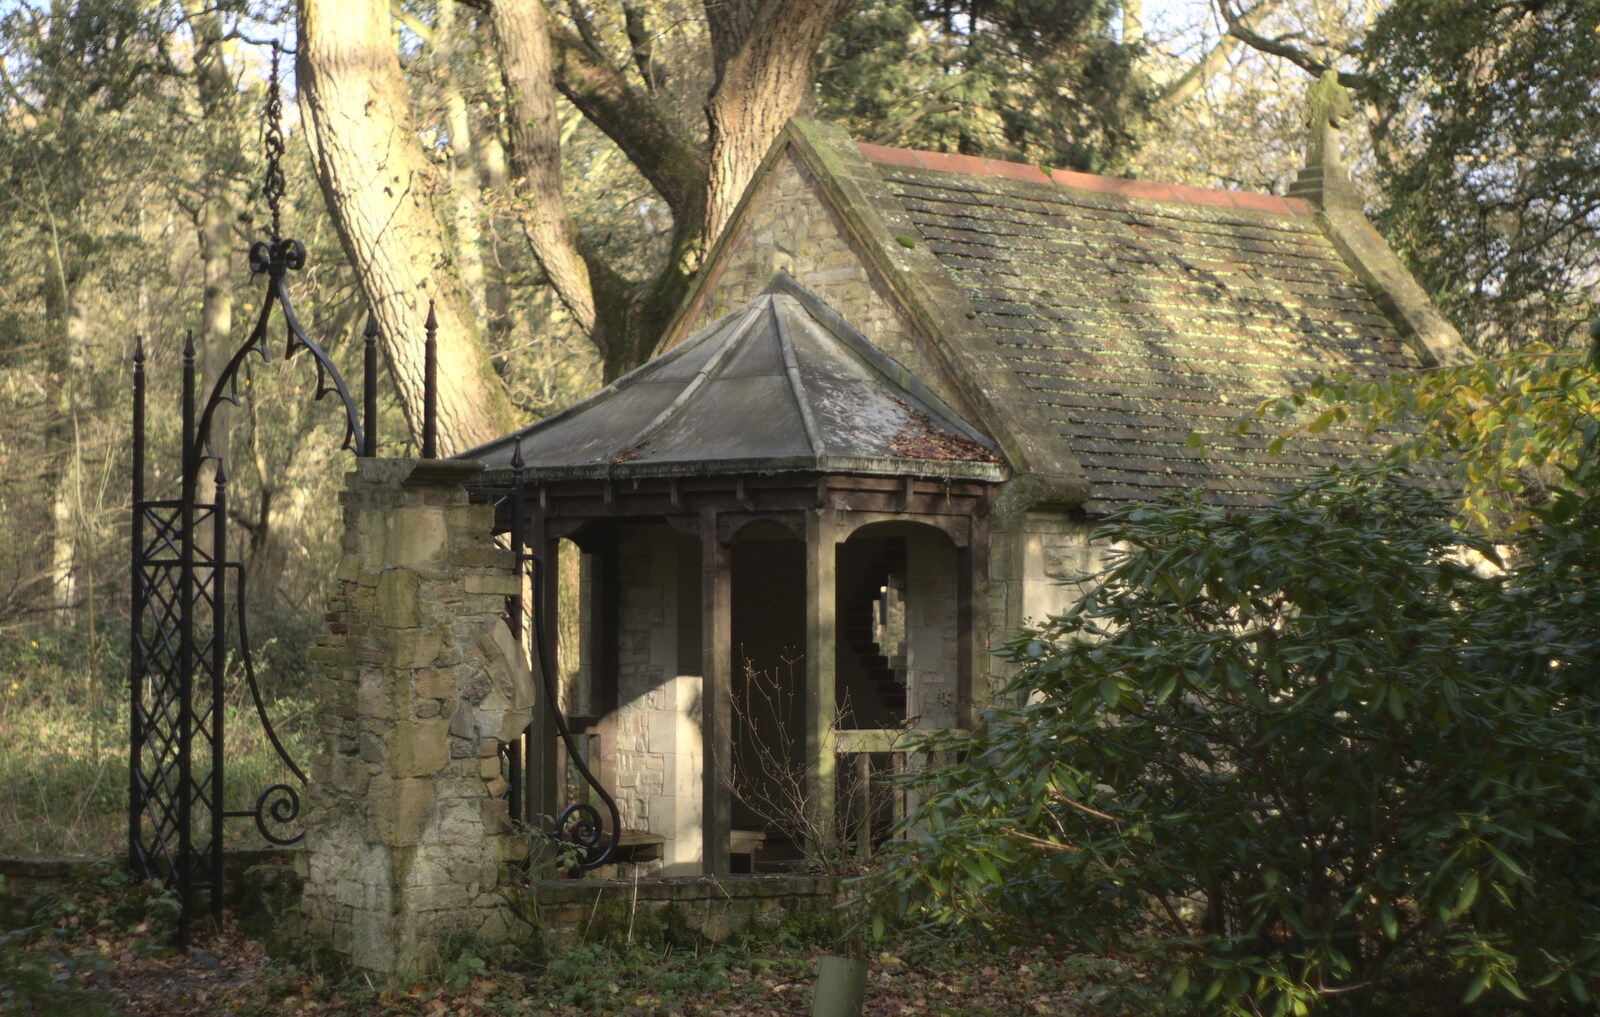 The folly near the pet cemetary from Hot-tub Penthouse, Thornham Walks, and Building, London and Suffolk - 12th November 2015